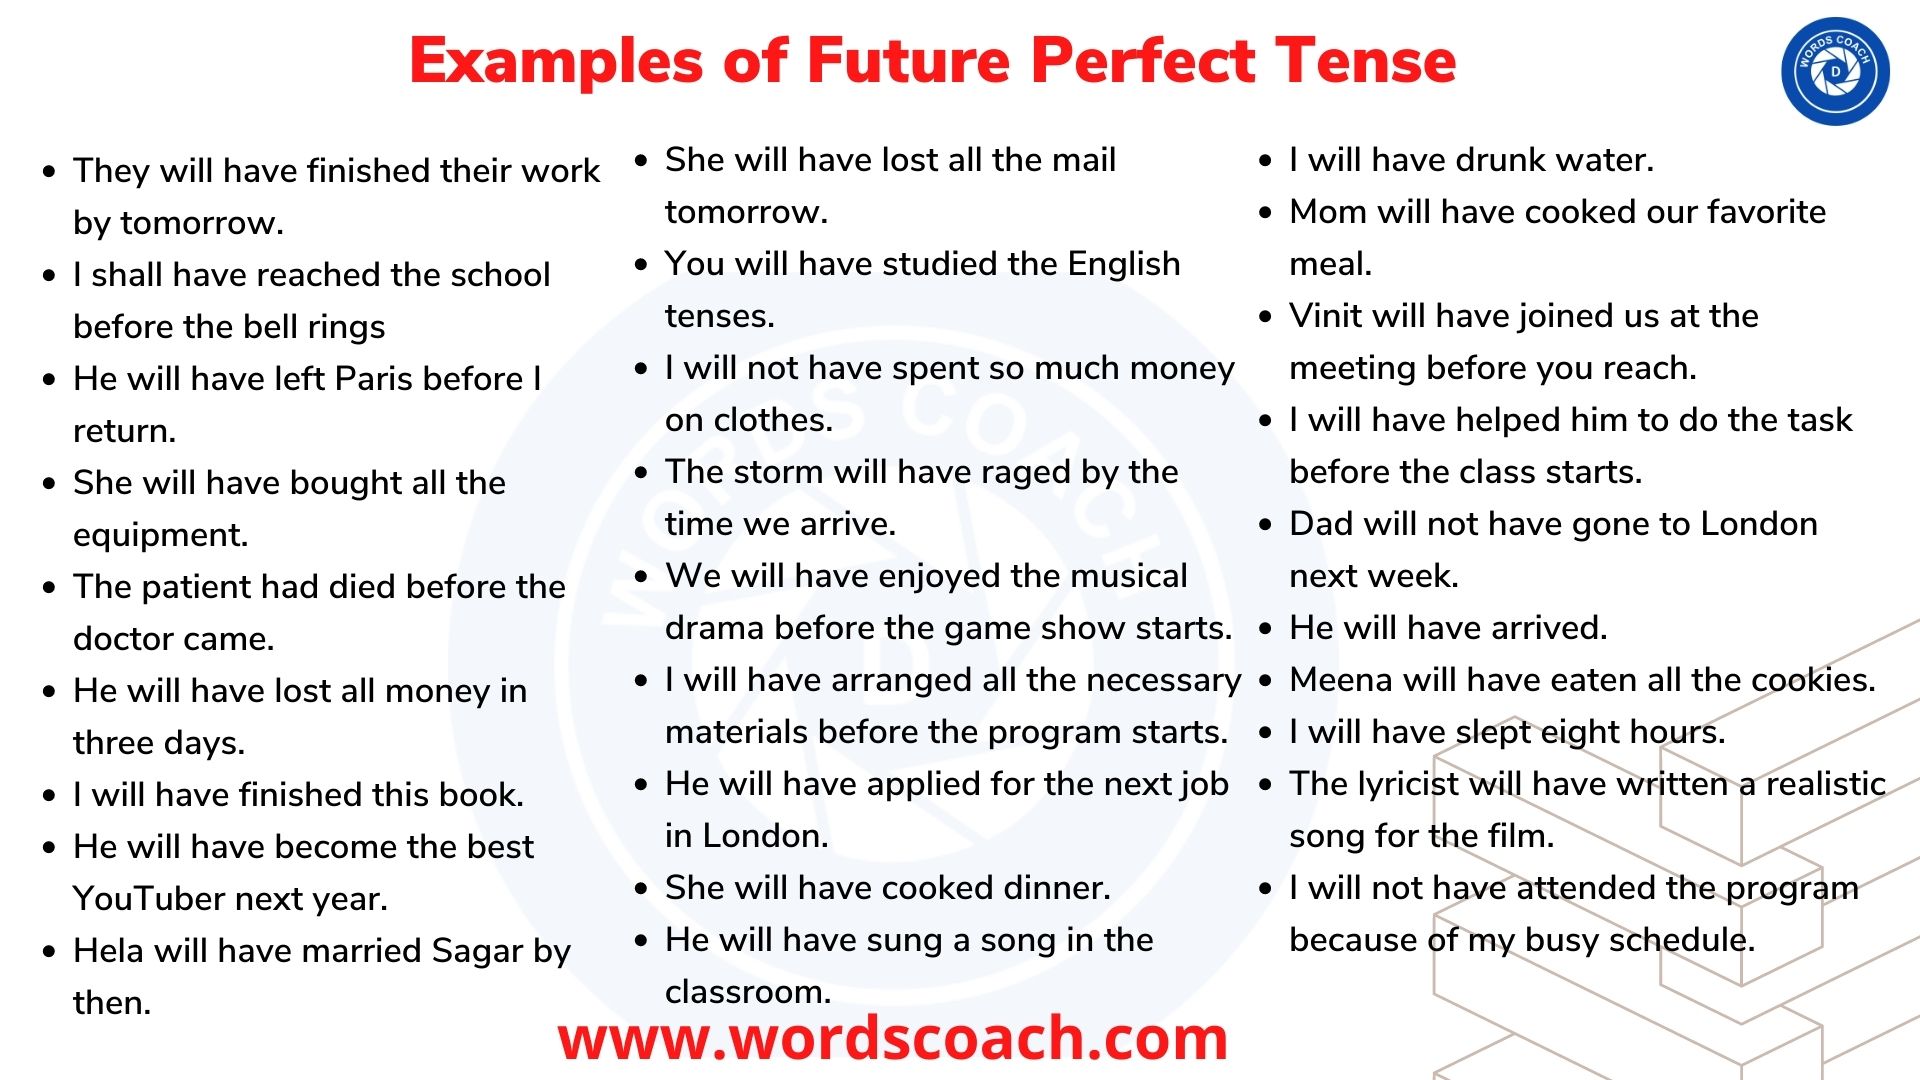 Examples of Future Perfect Tense - wordscoach.com